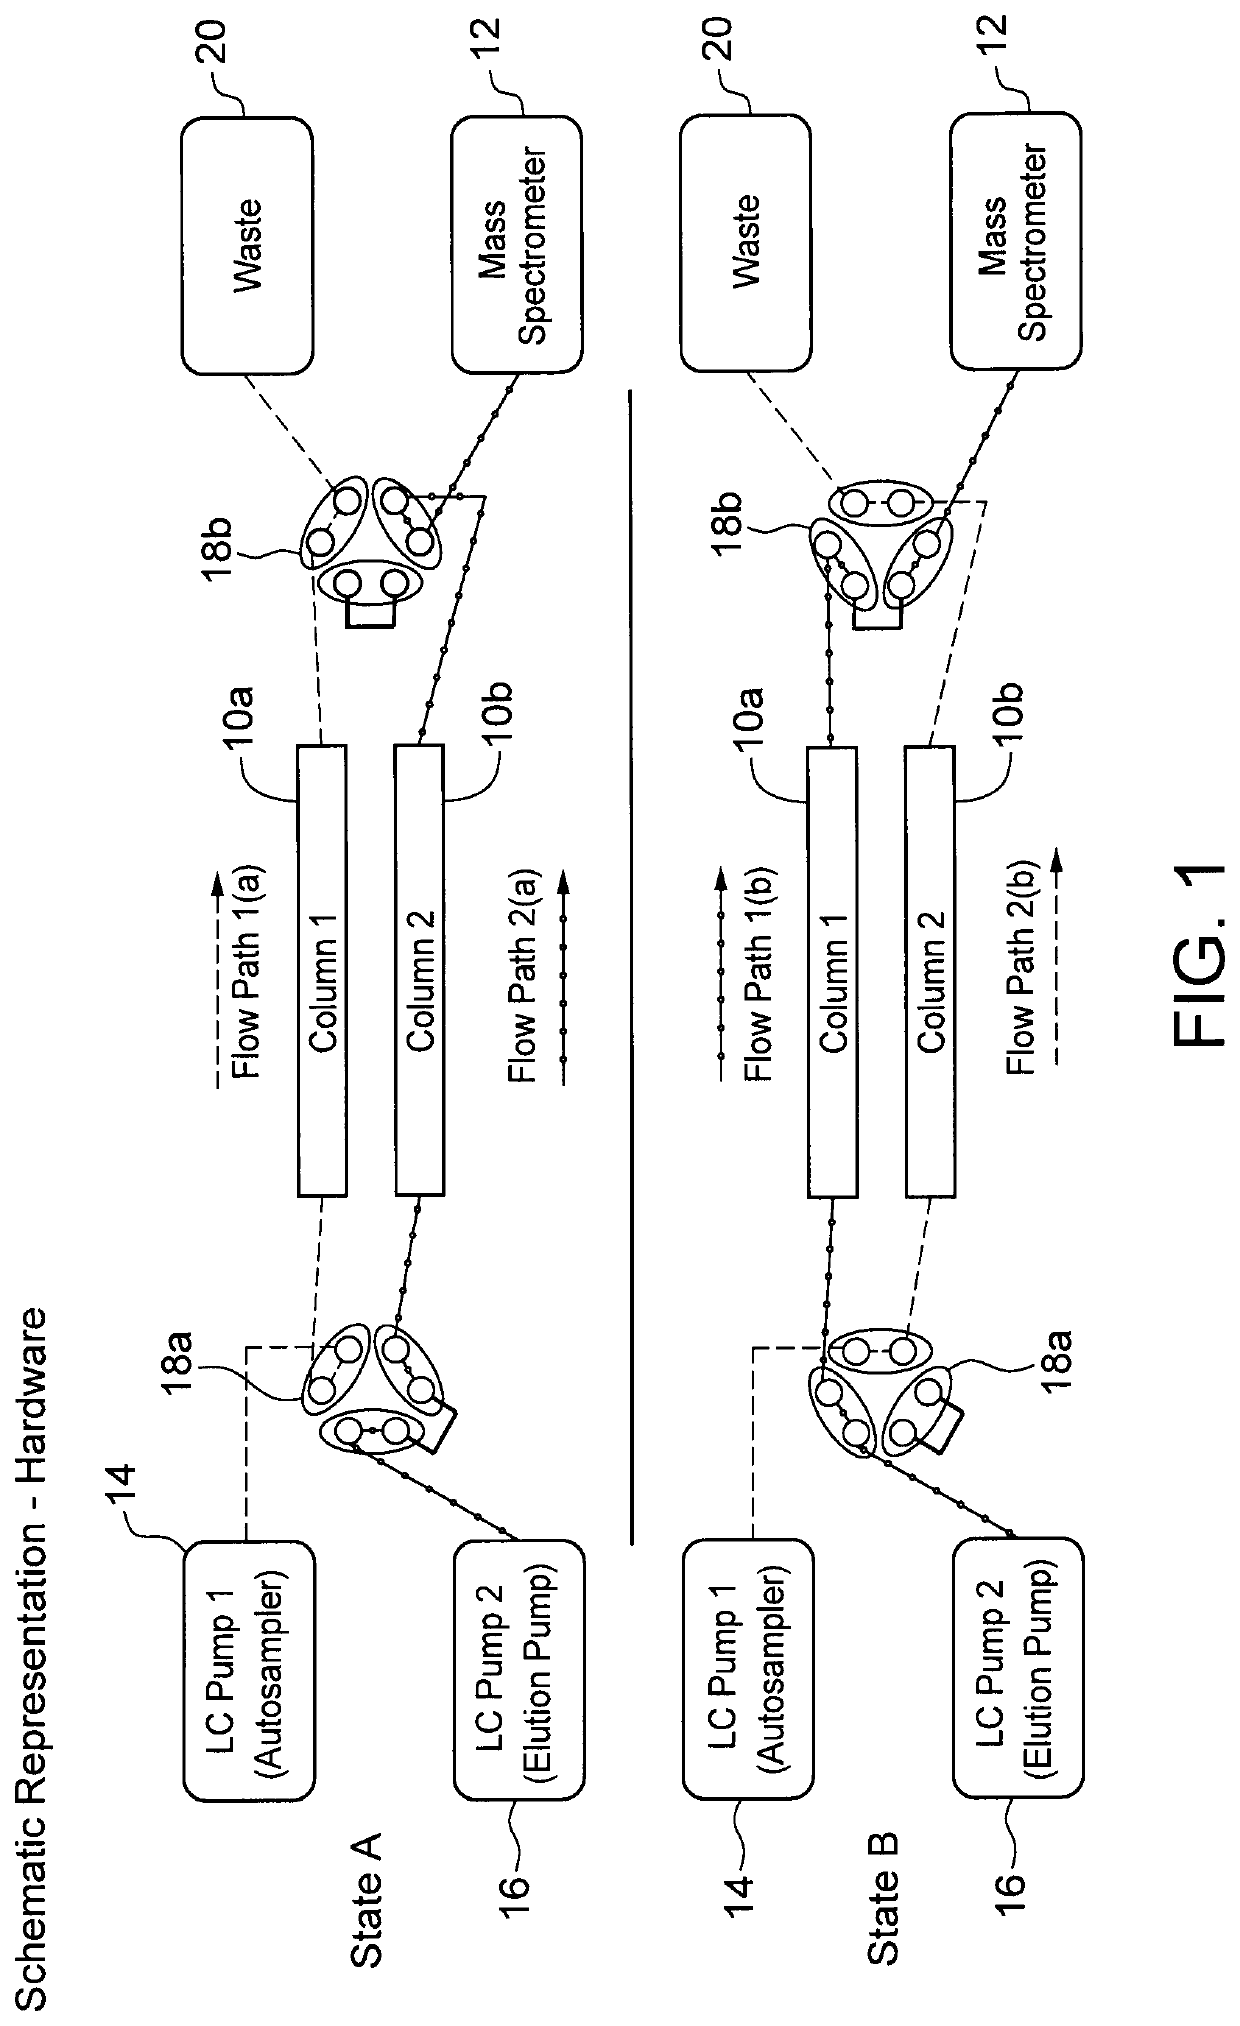 Method for Detecting Urinary Tract Infections and Sample Analysis Using Liquid Chromatography